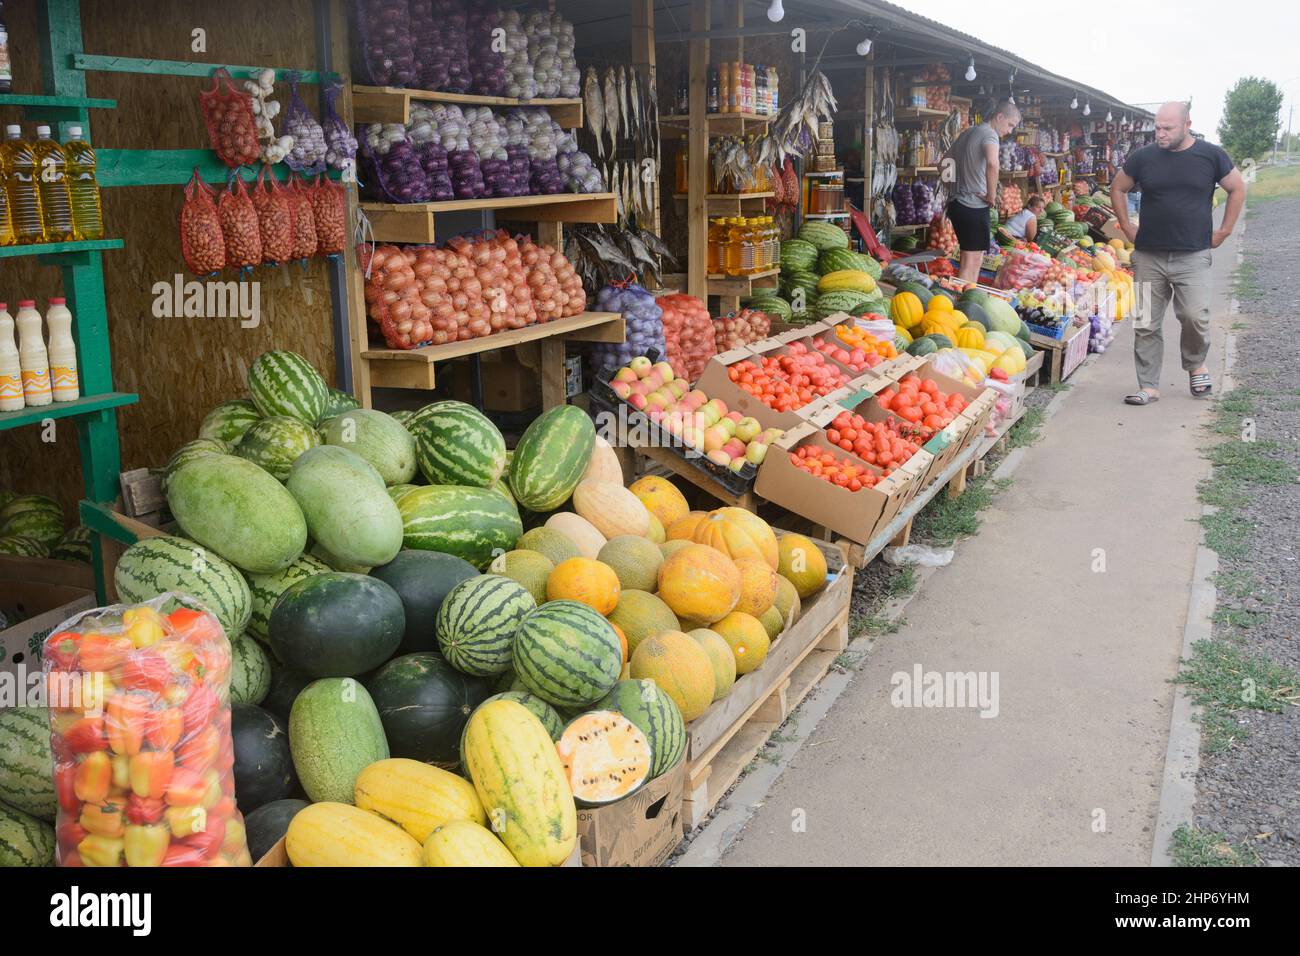 Volgograd, Russia - August 2021: Farmers market on road. Watermelons, tomatoes and vegetables. Environmentally friendly non-GMO products. Stock Photo